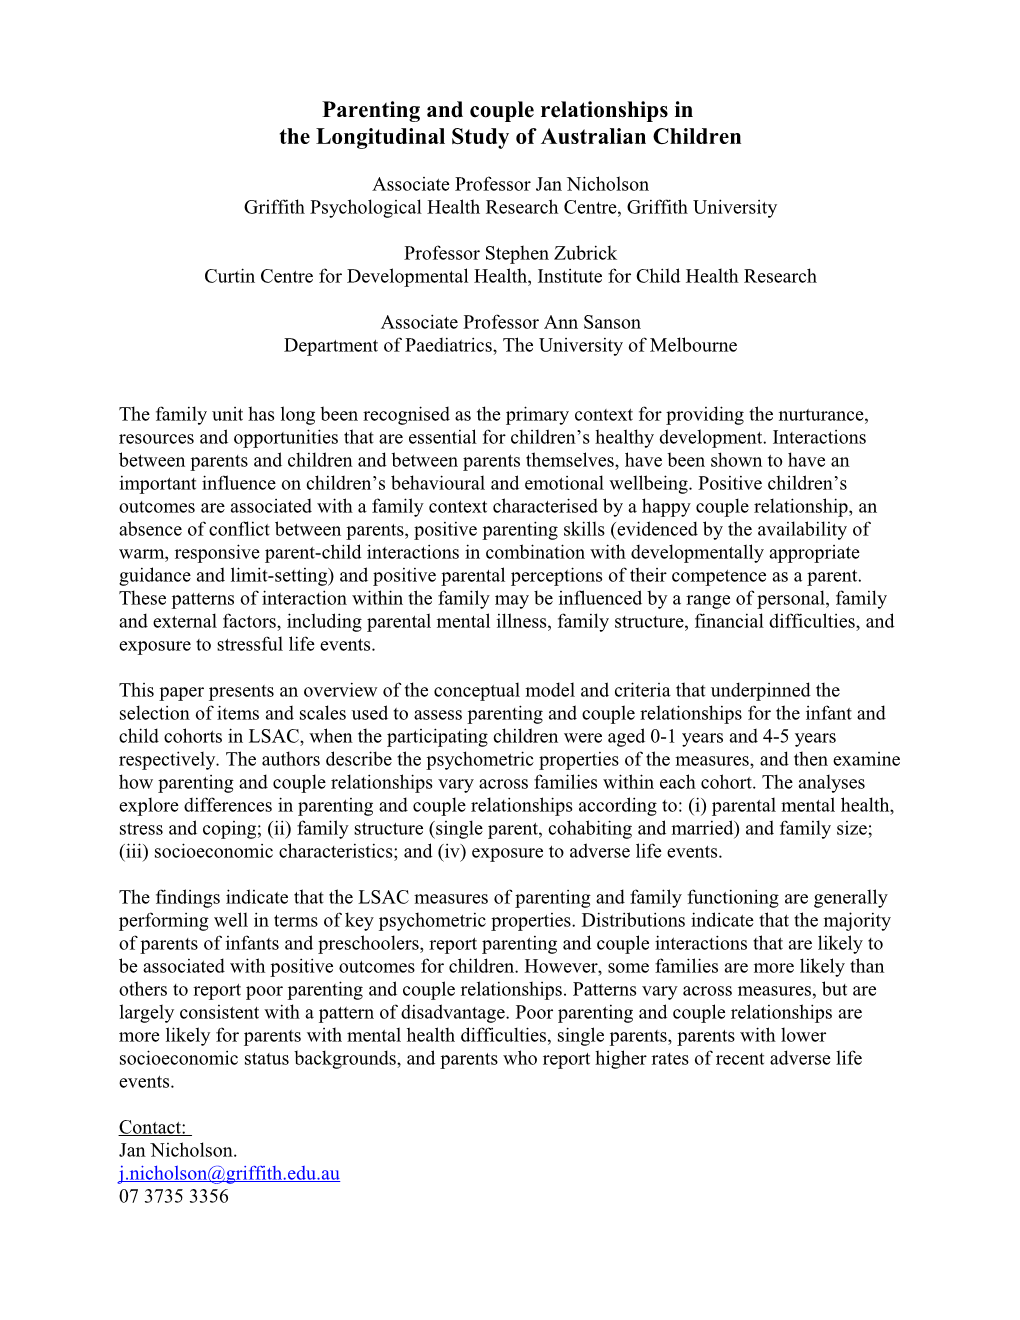 Abstract for ACSPRI Conference, December 2006